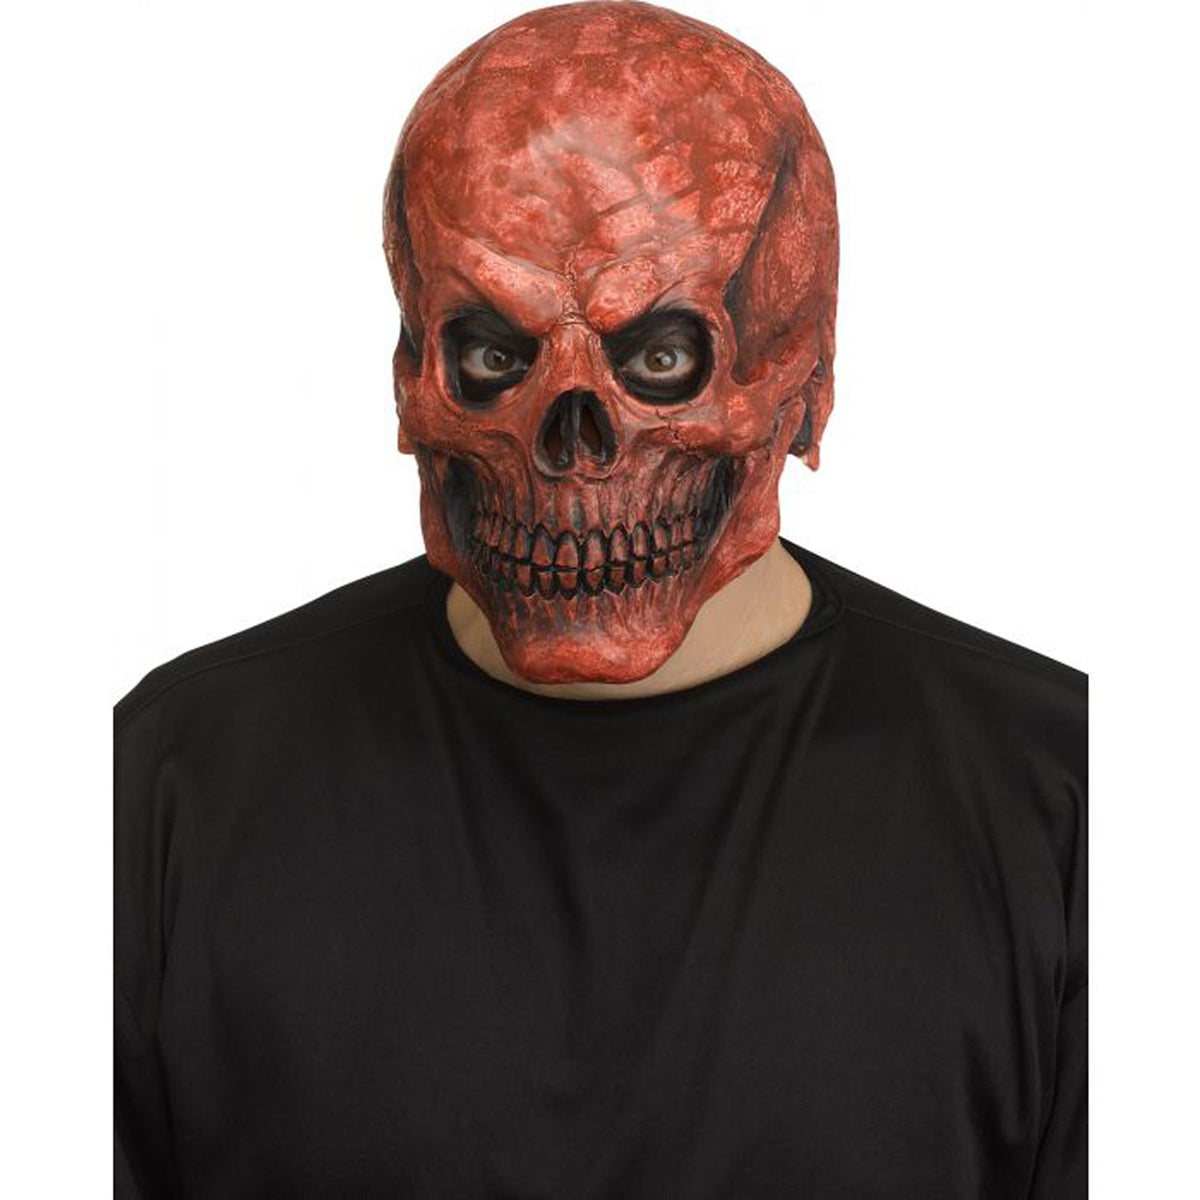 FUN WORLD Costume Accessories Red Realistic Skull Mask for Adults 071765086257